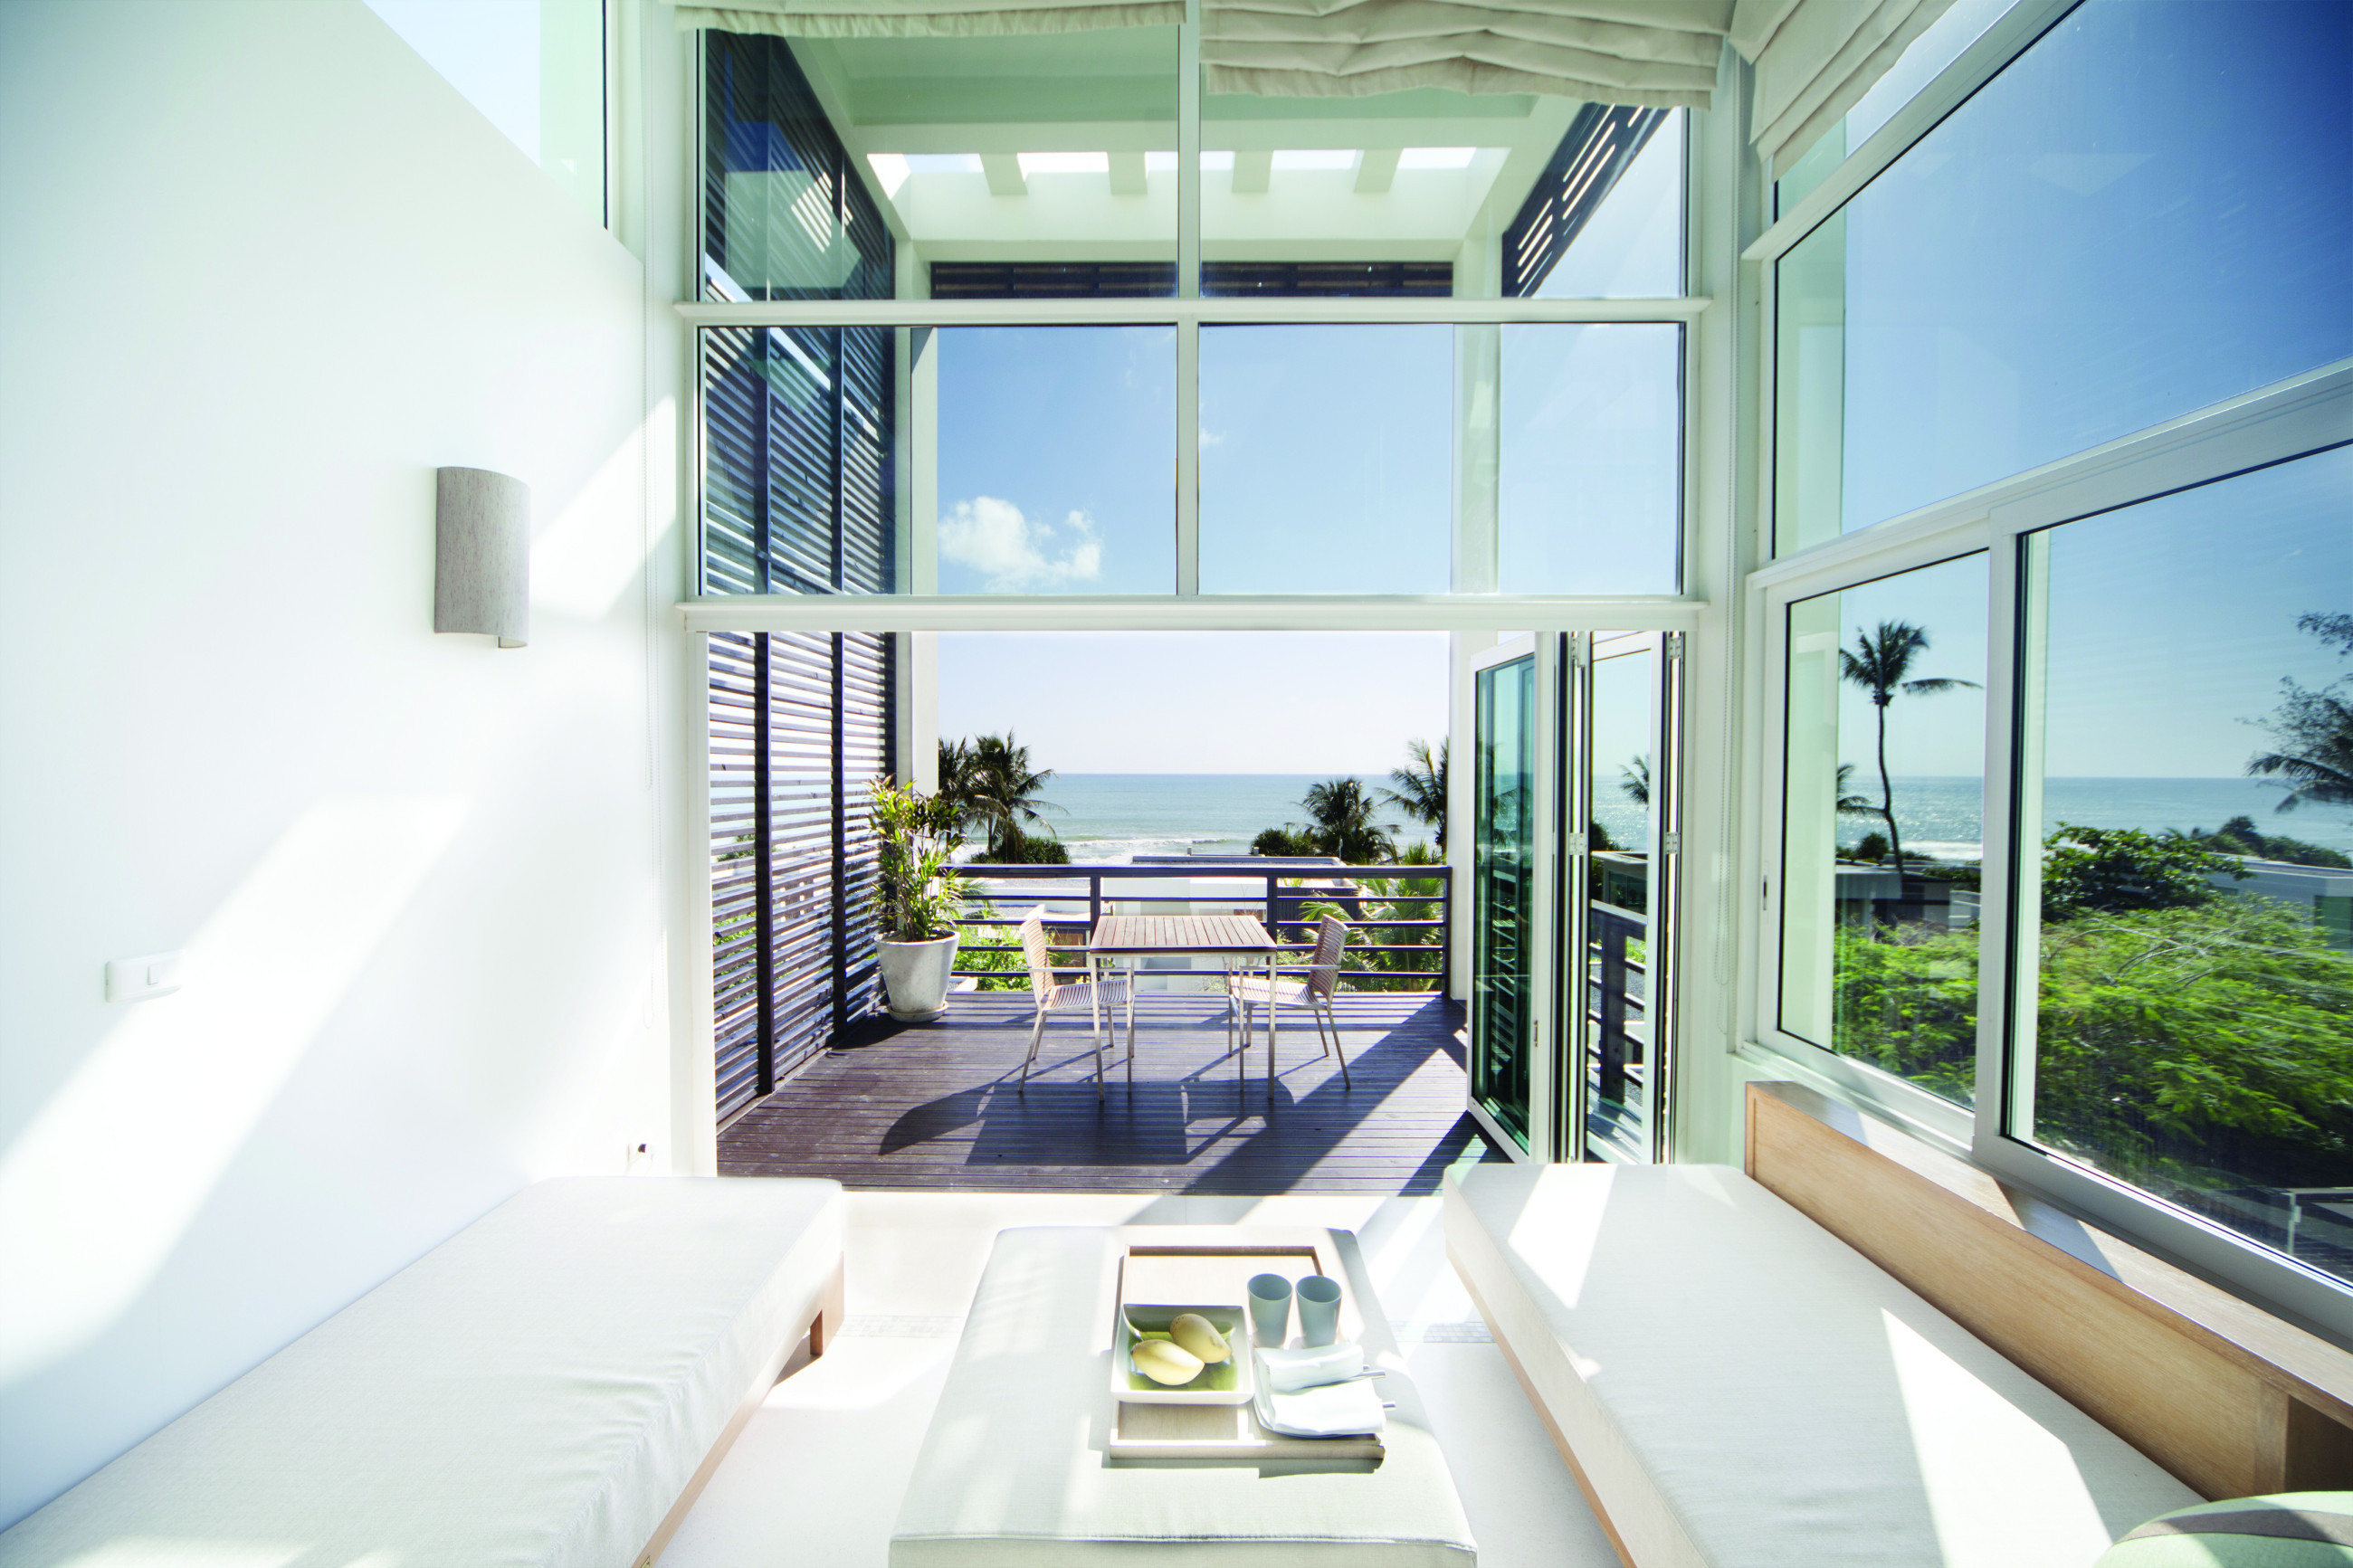 Spacious and breezy conservatory with ocean vistas and a white seating arrangement